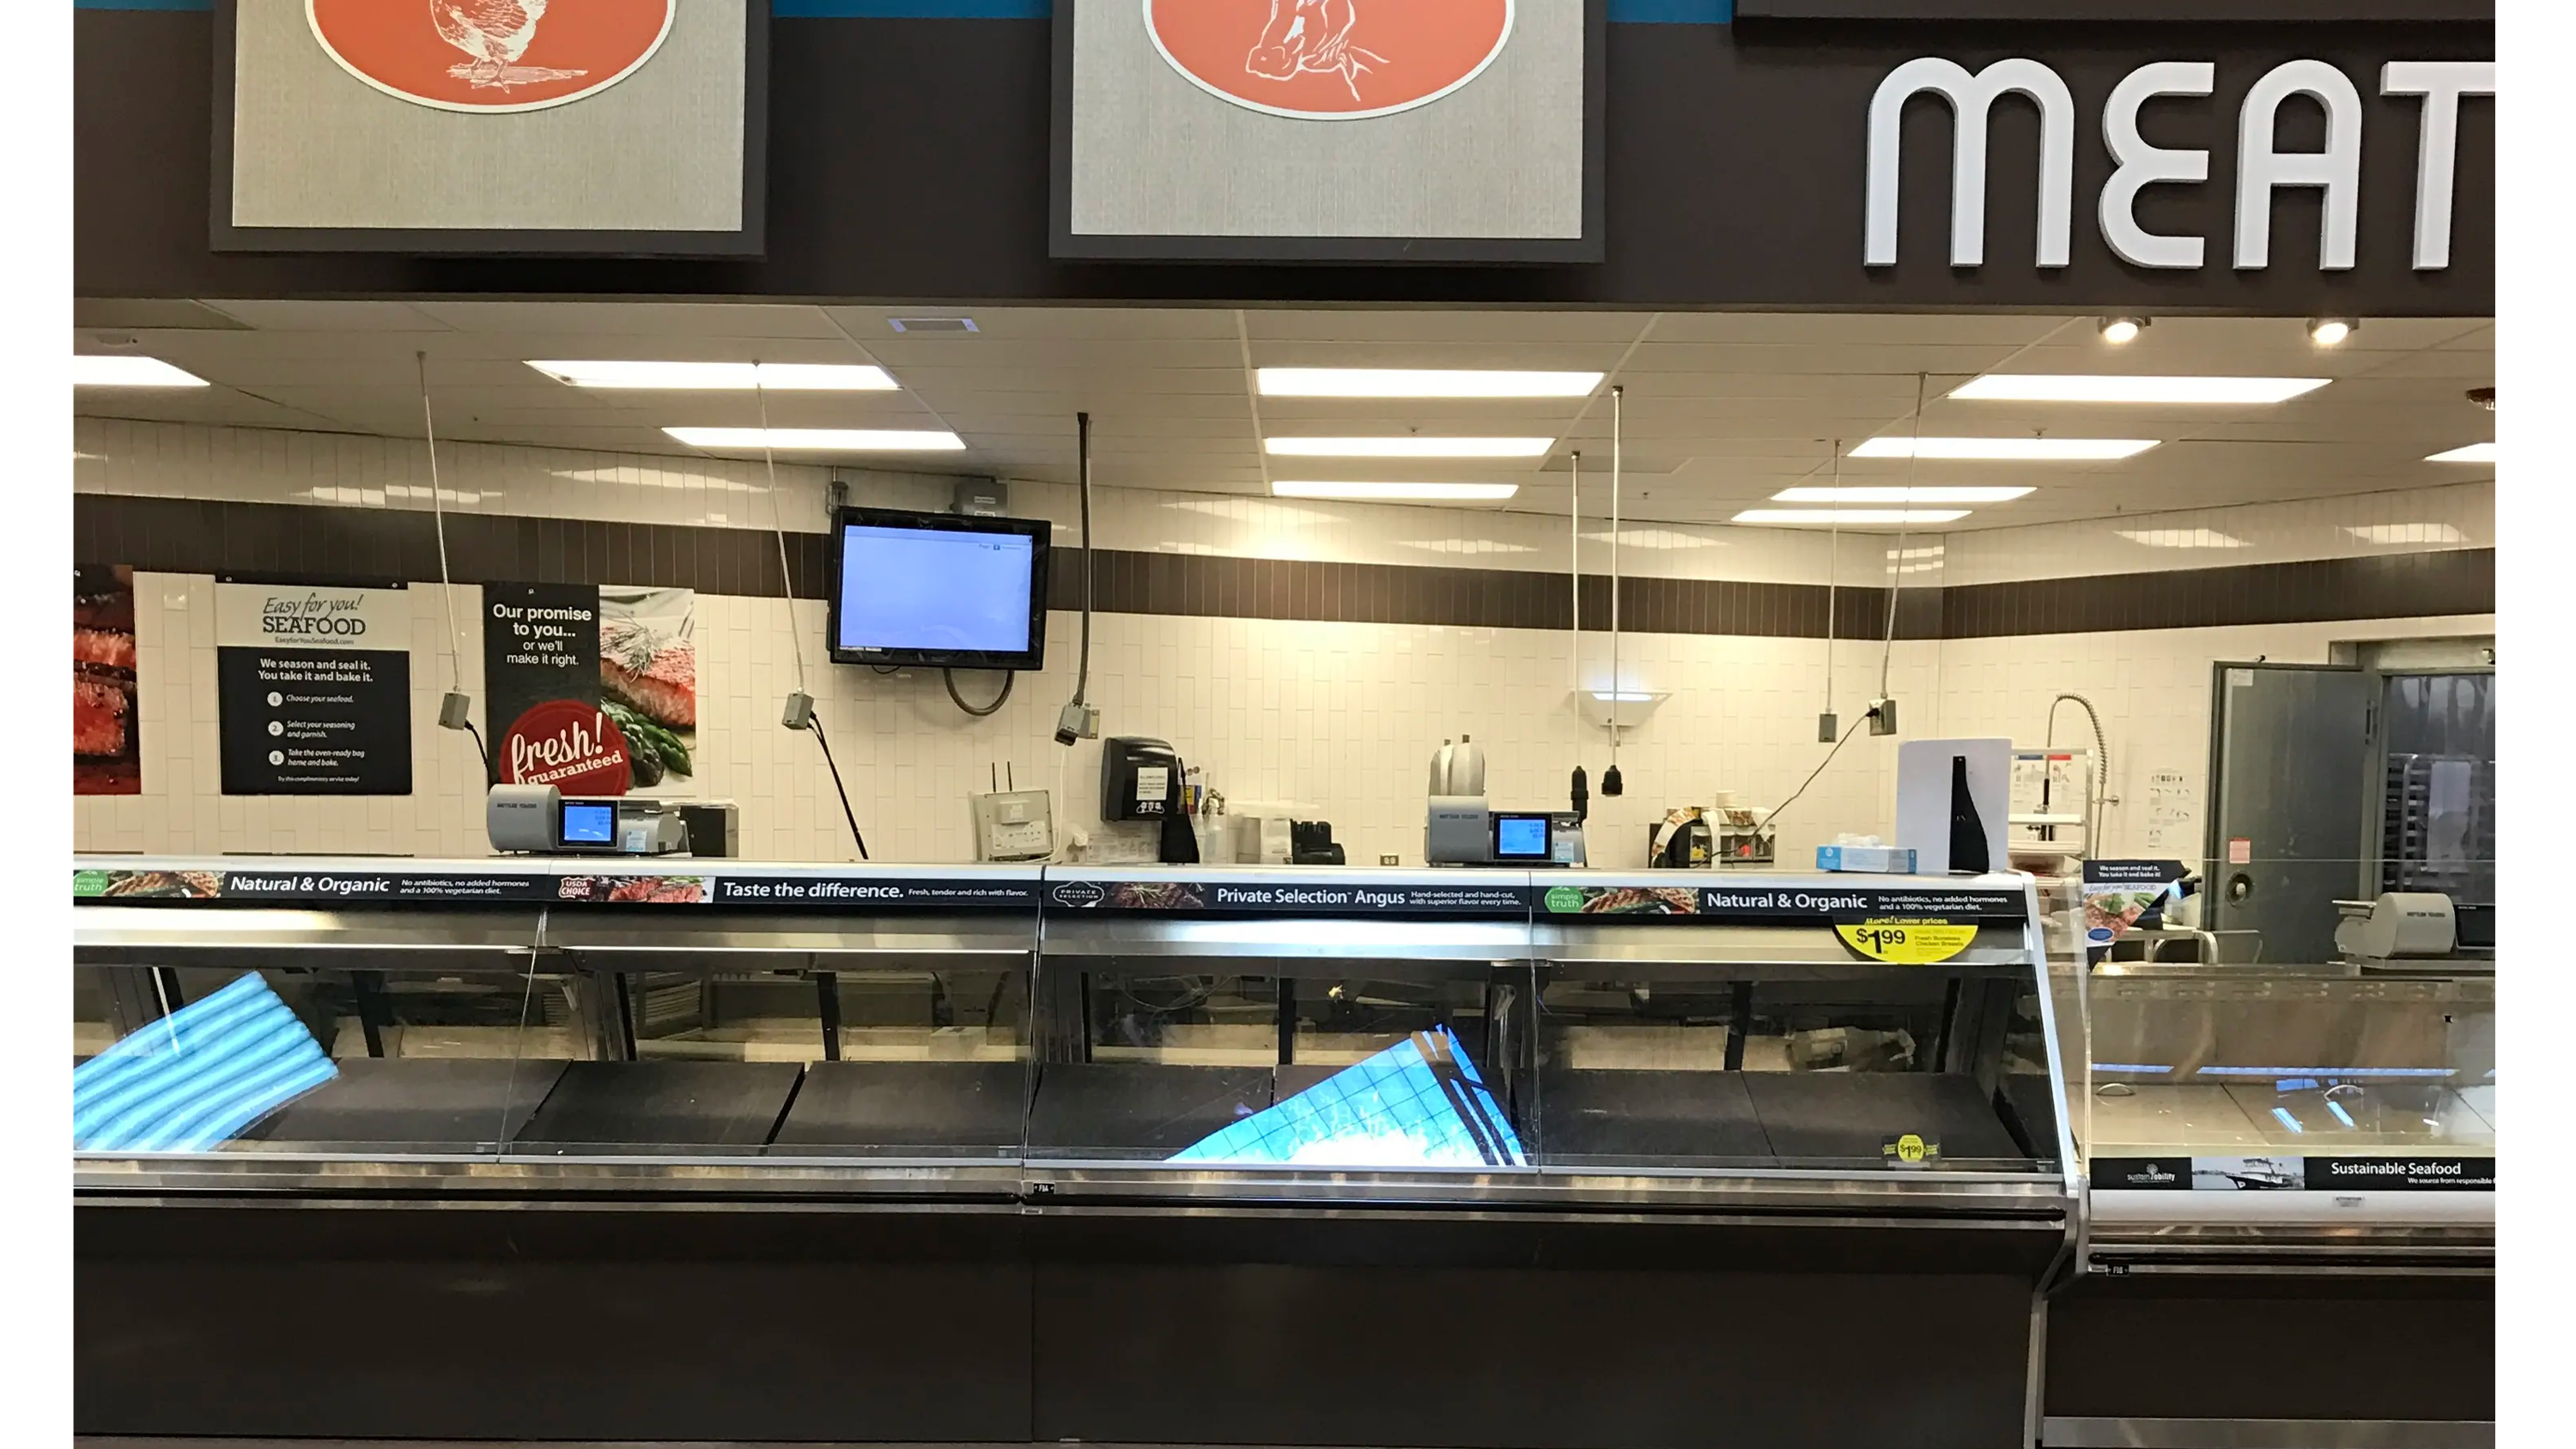 Water resistant outdoor and indoor TV cover at grocery store for deli and meat handling